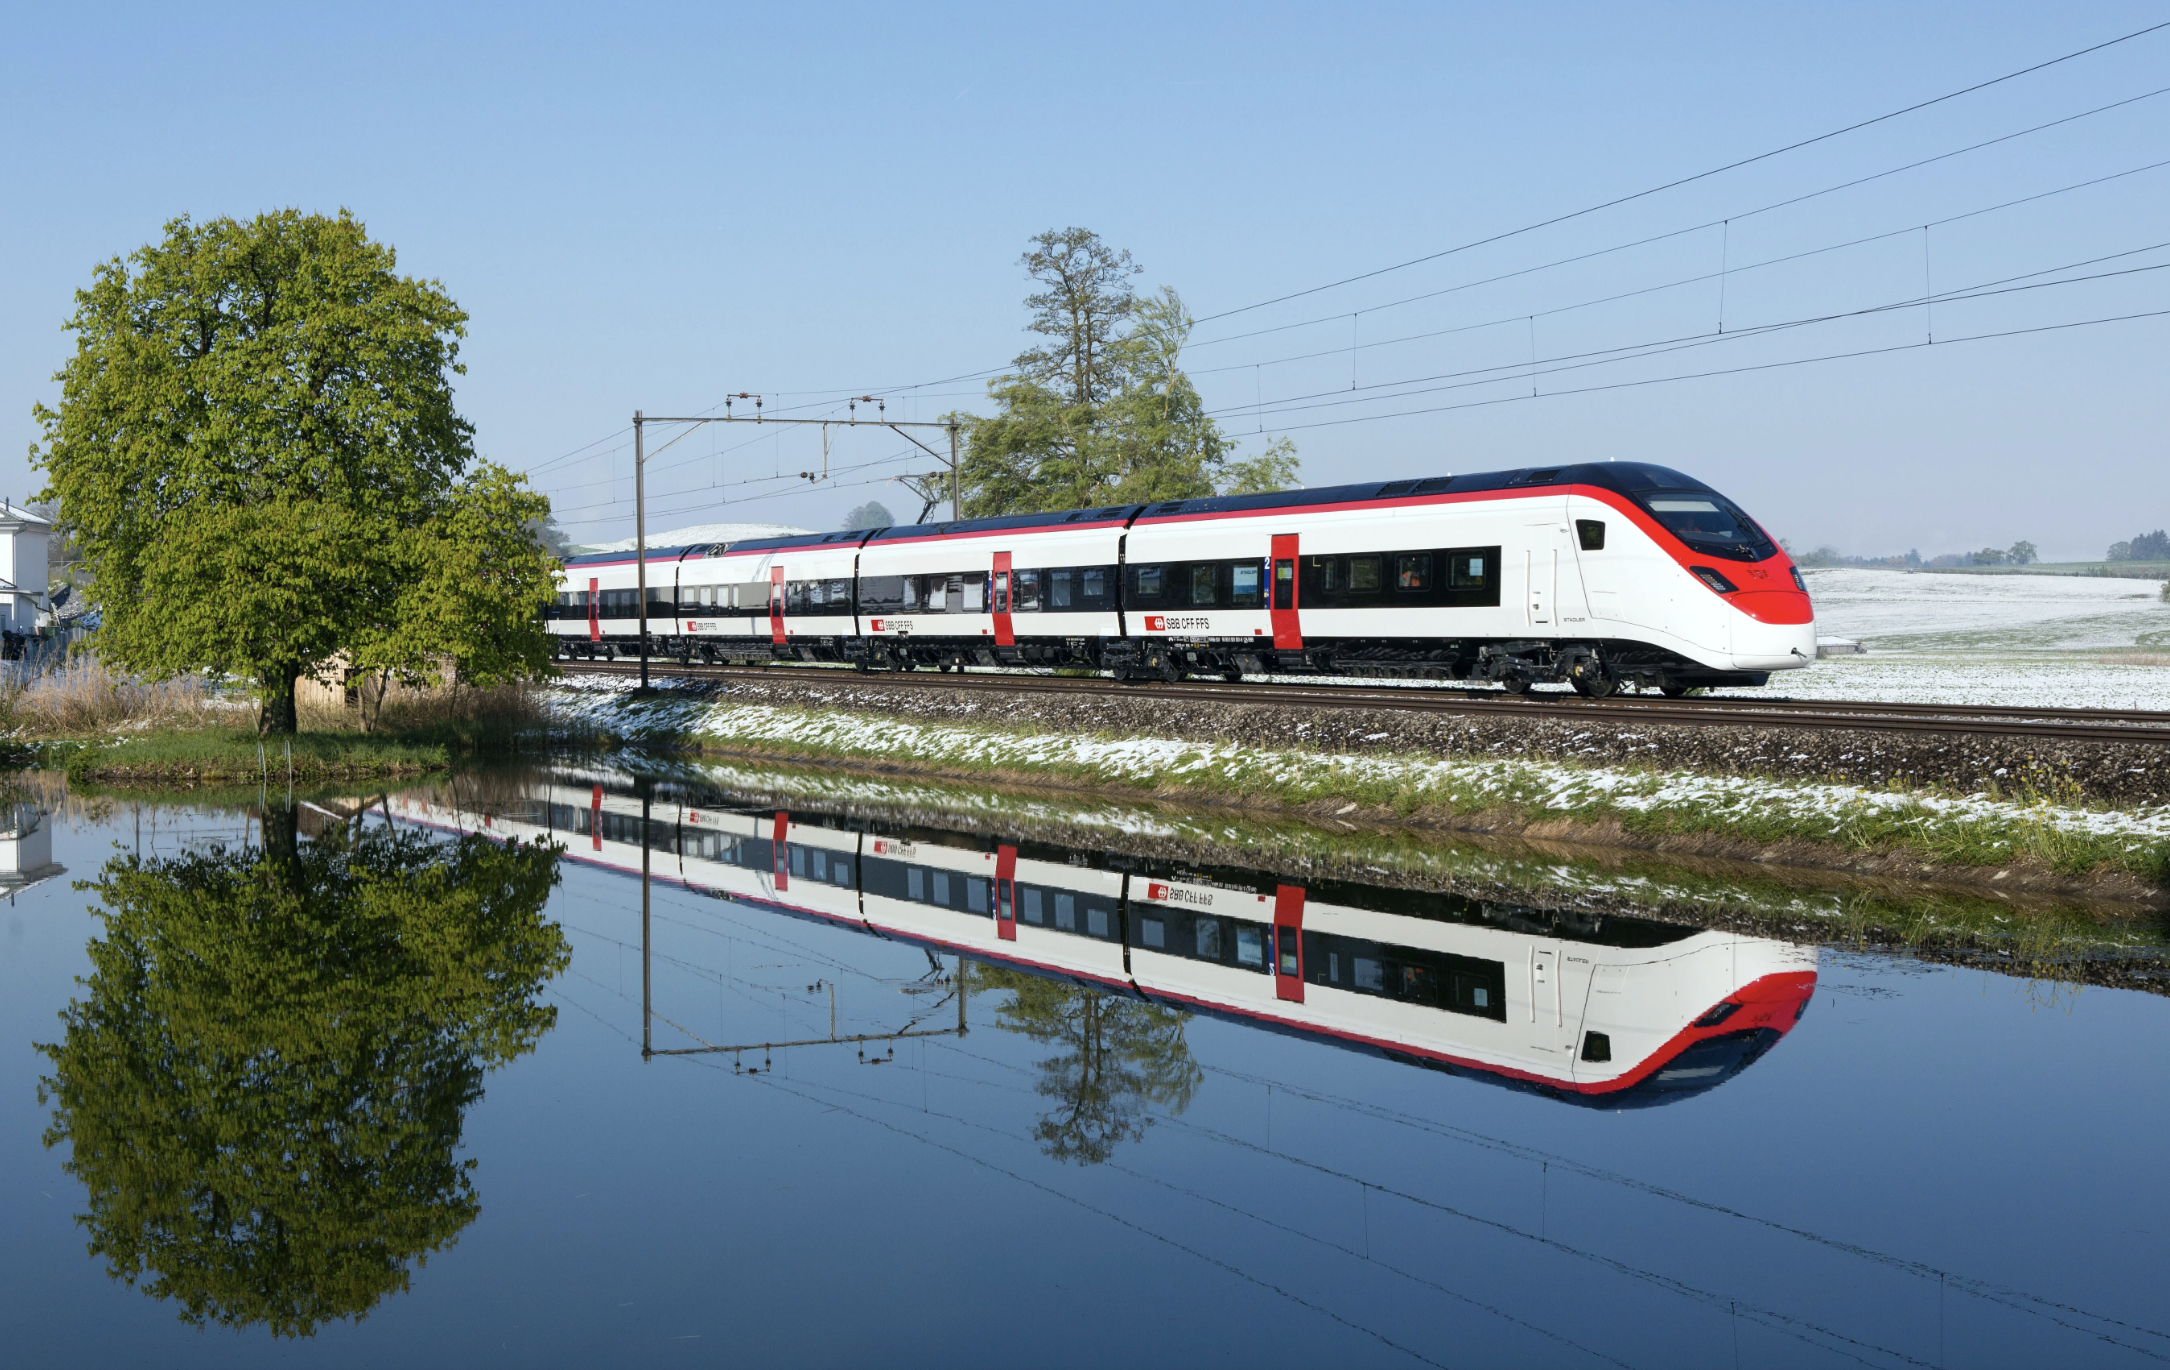 The Giruno trains are eleven-part electric multi-system multiple units